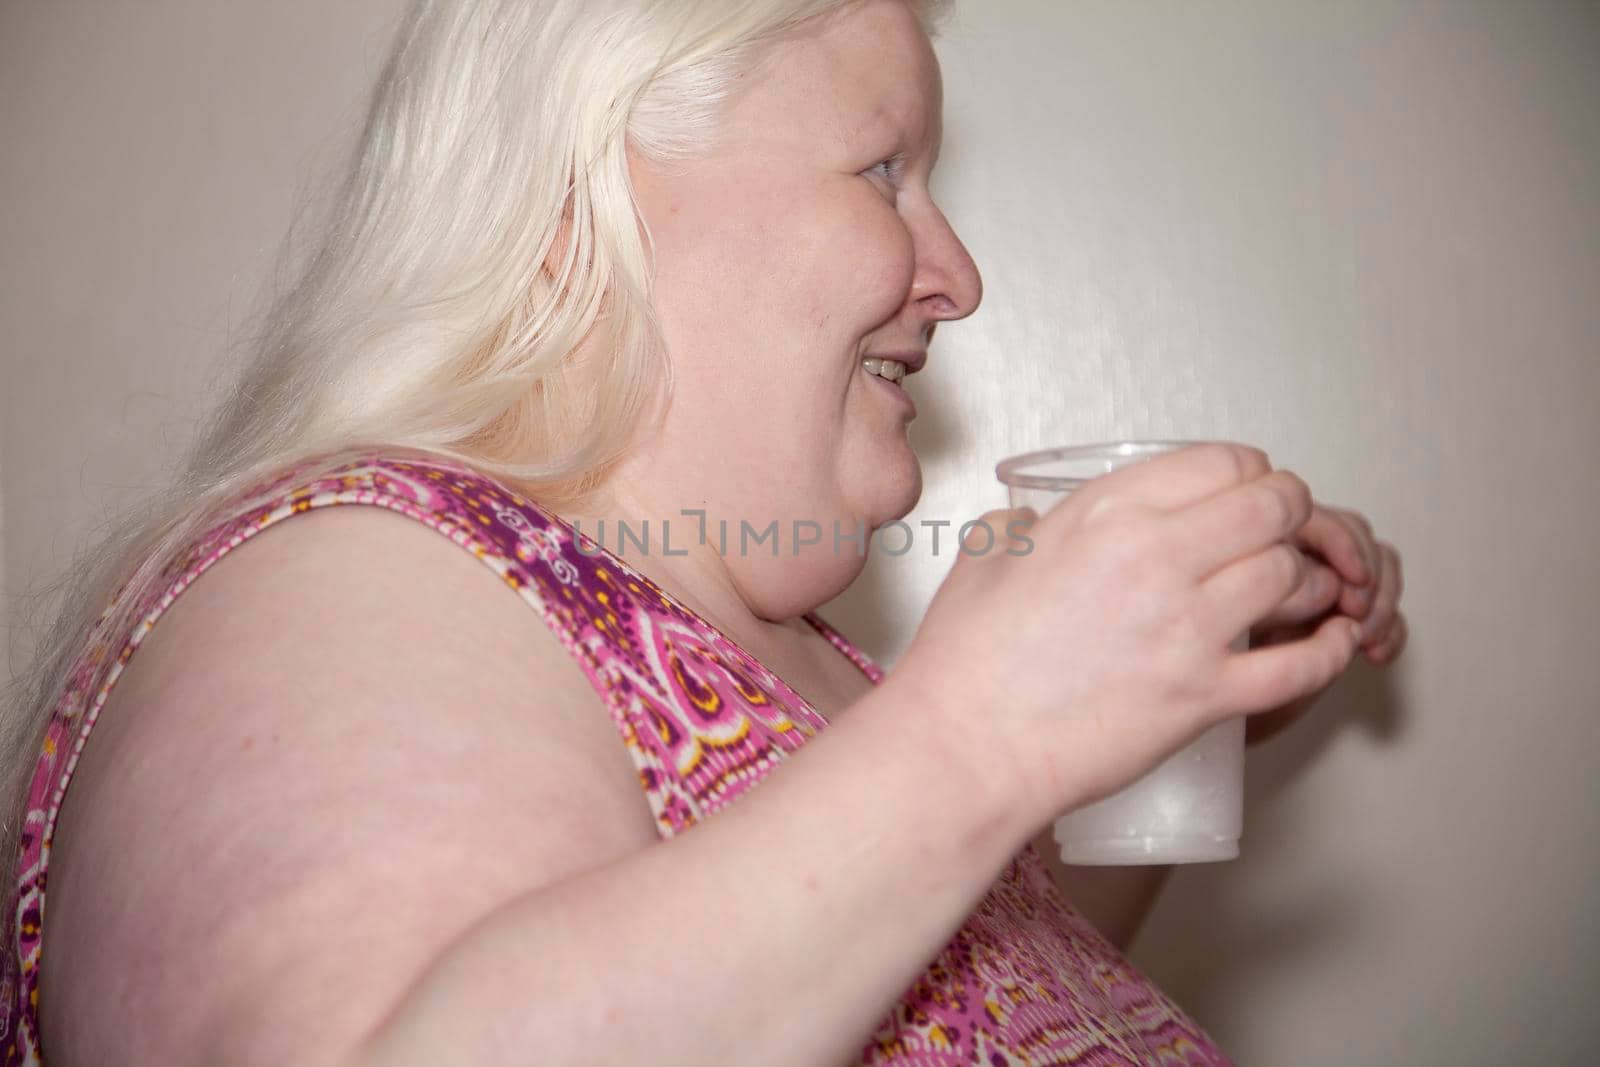 Albino woman holding a clear cup of drinking water indoors